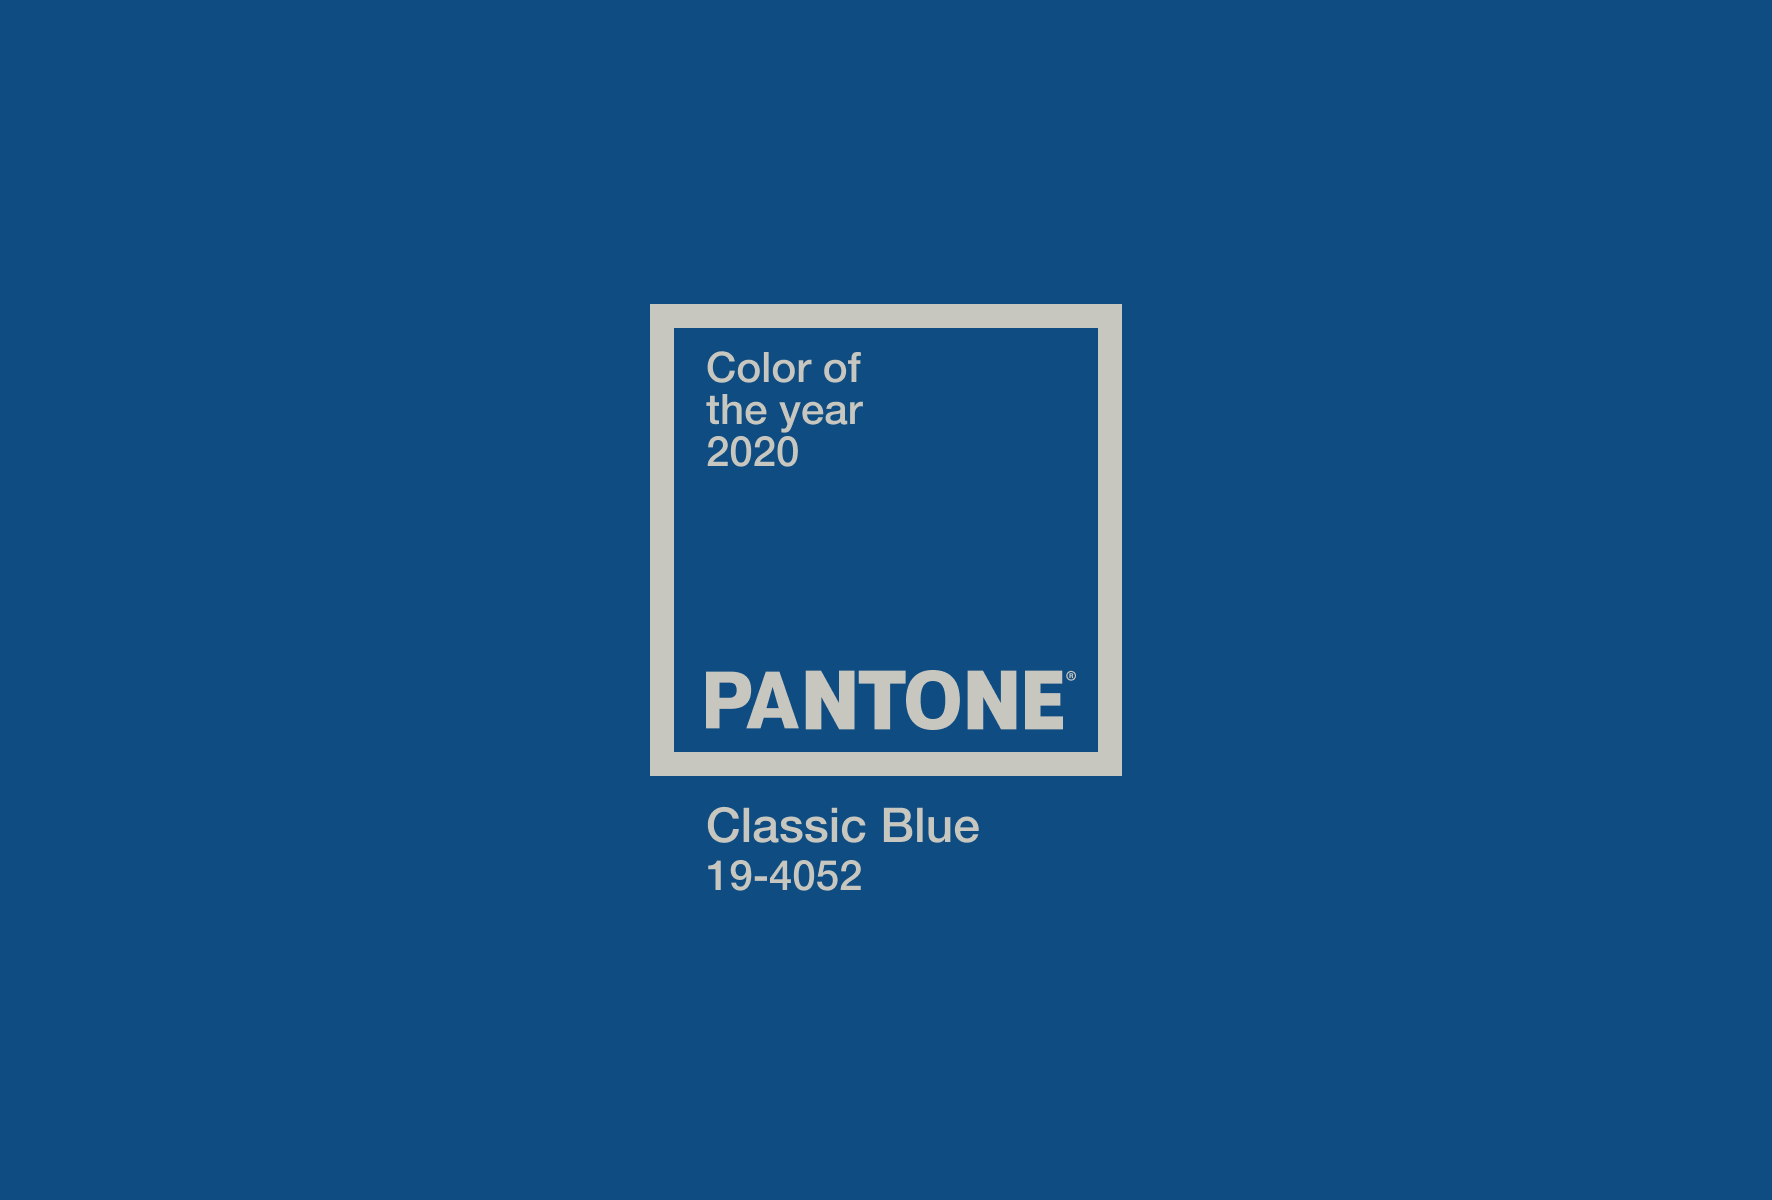 Pantone Color Of The Year 2020 - Classic Blue